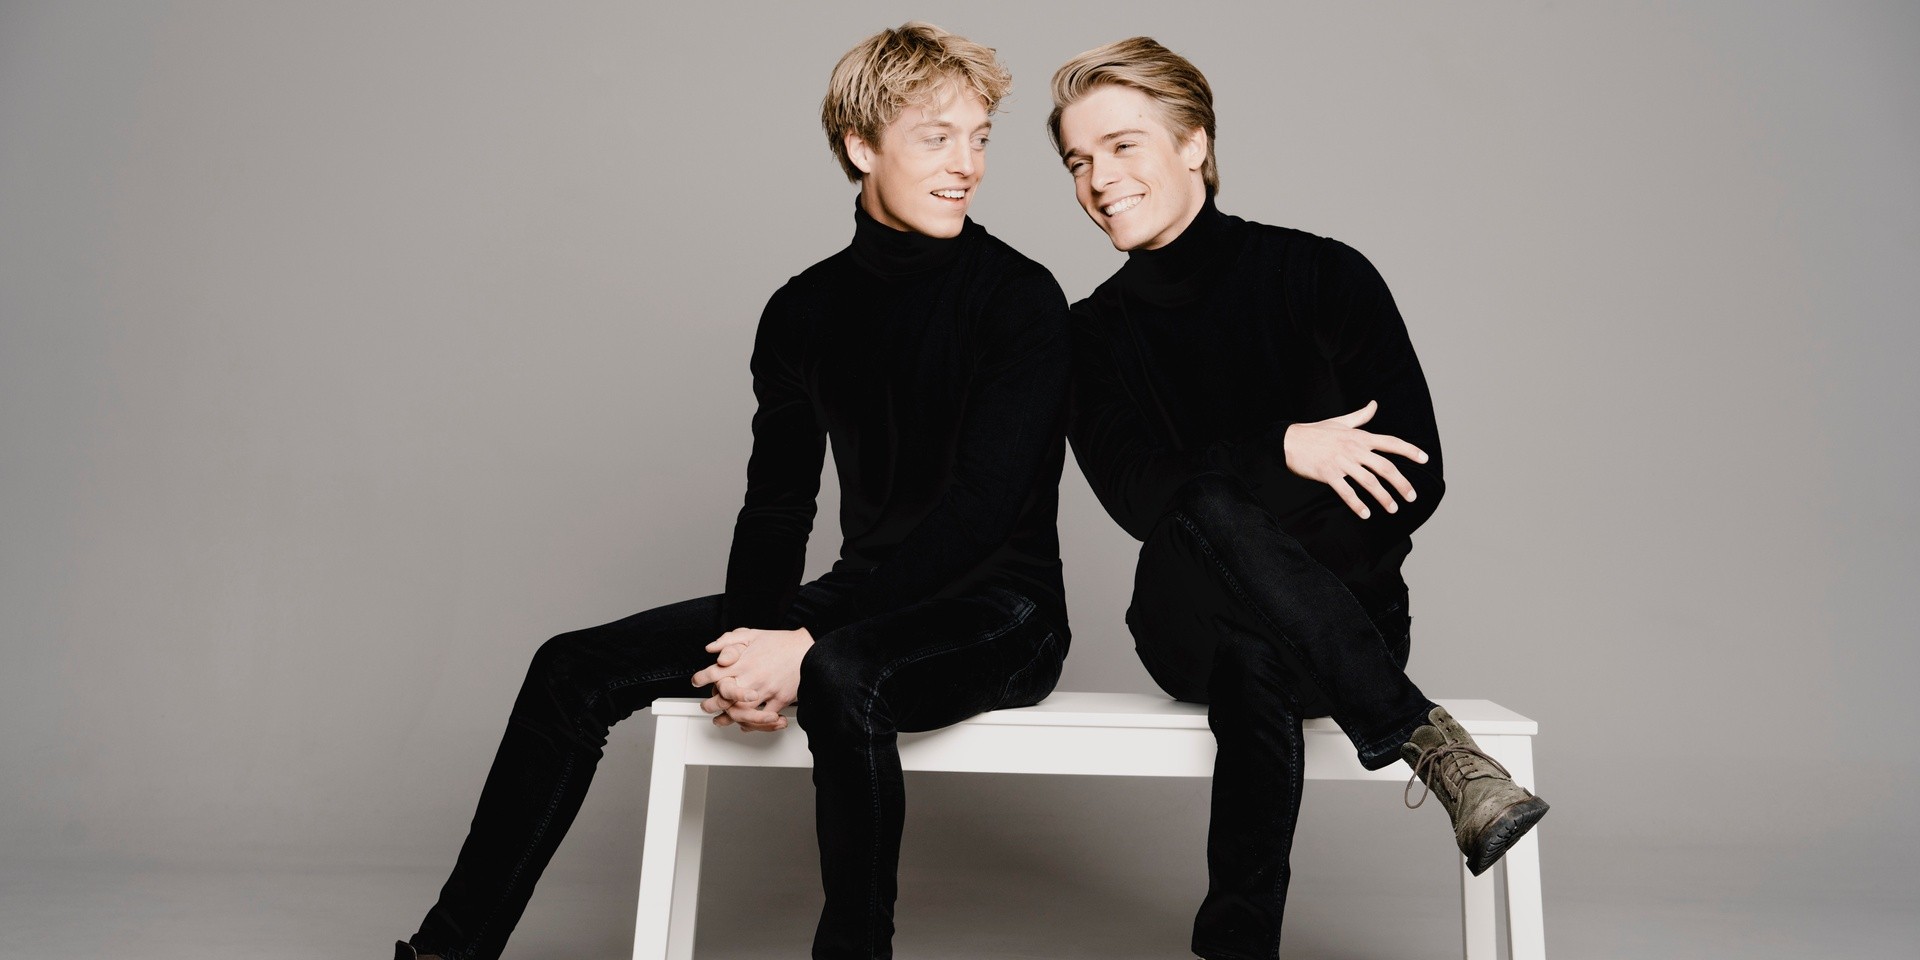 "The Mozart concertos have a very special place in our hearts" : An interview with the Jussen Brothers 